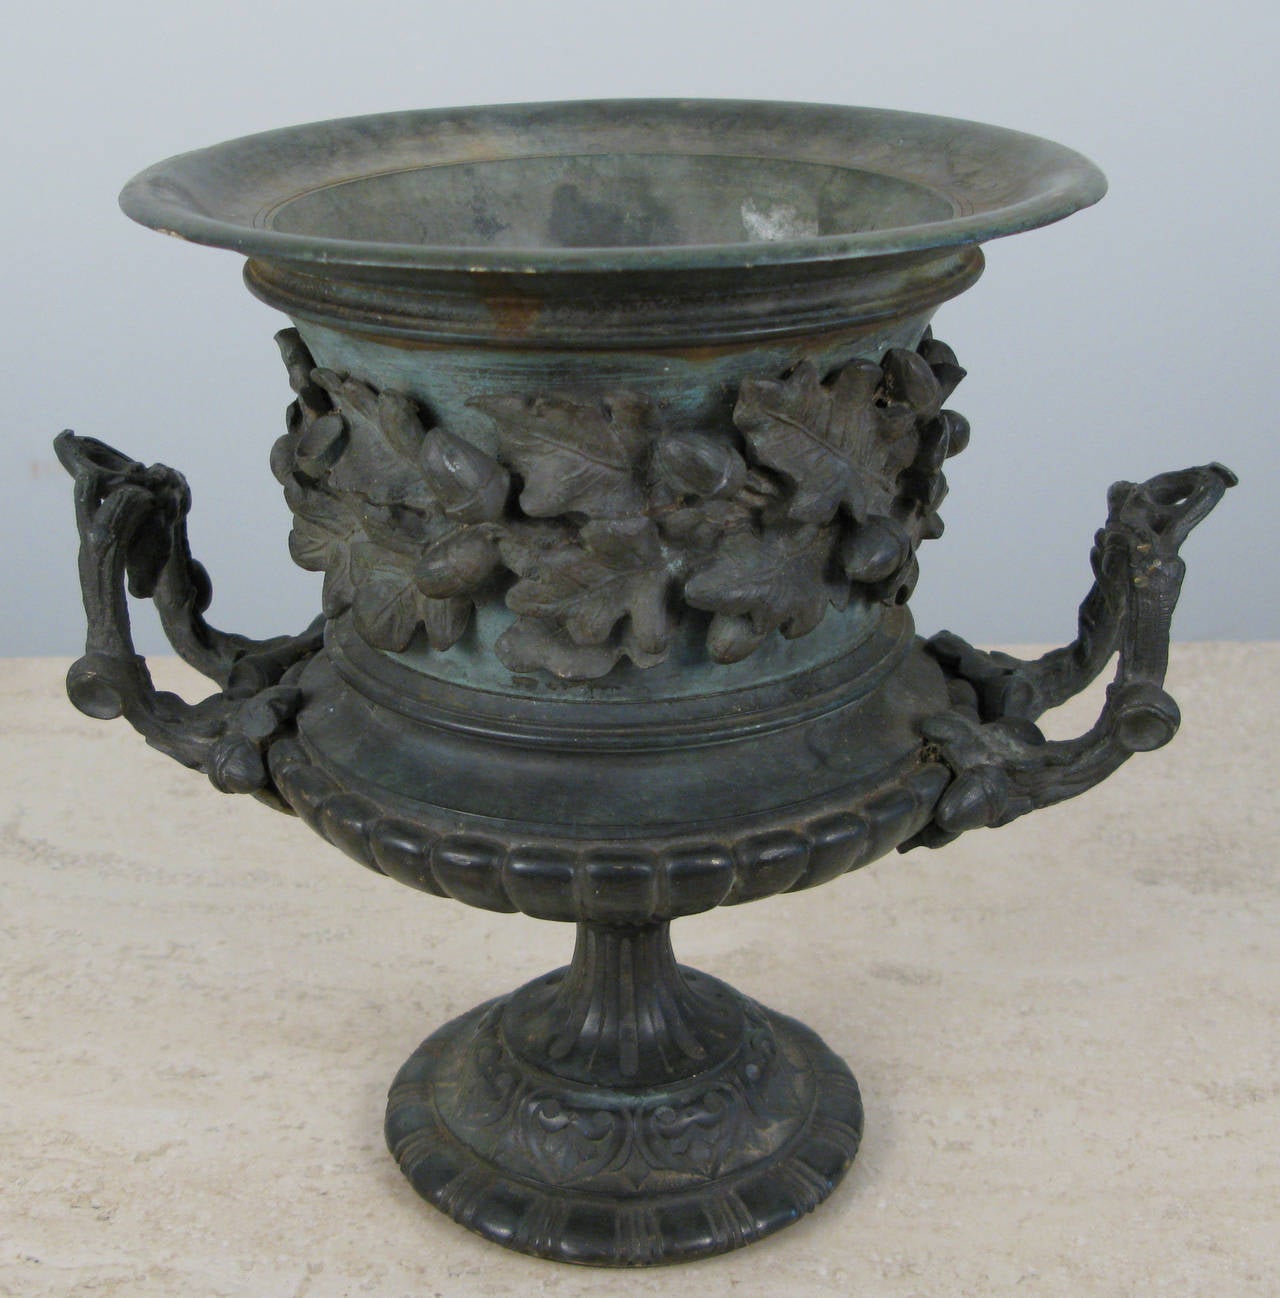 A spectacular 1870s-1880s table size bronze urn. Very fine quality acorn, leaf and twig carving. Beautifully proportioned and wonderful patina. Probably American.